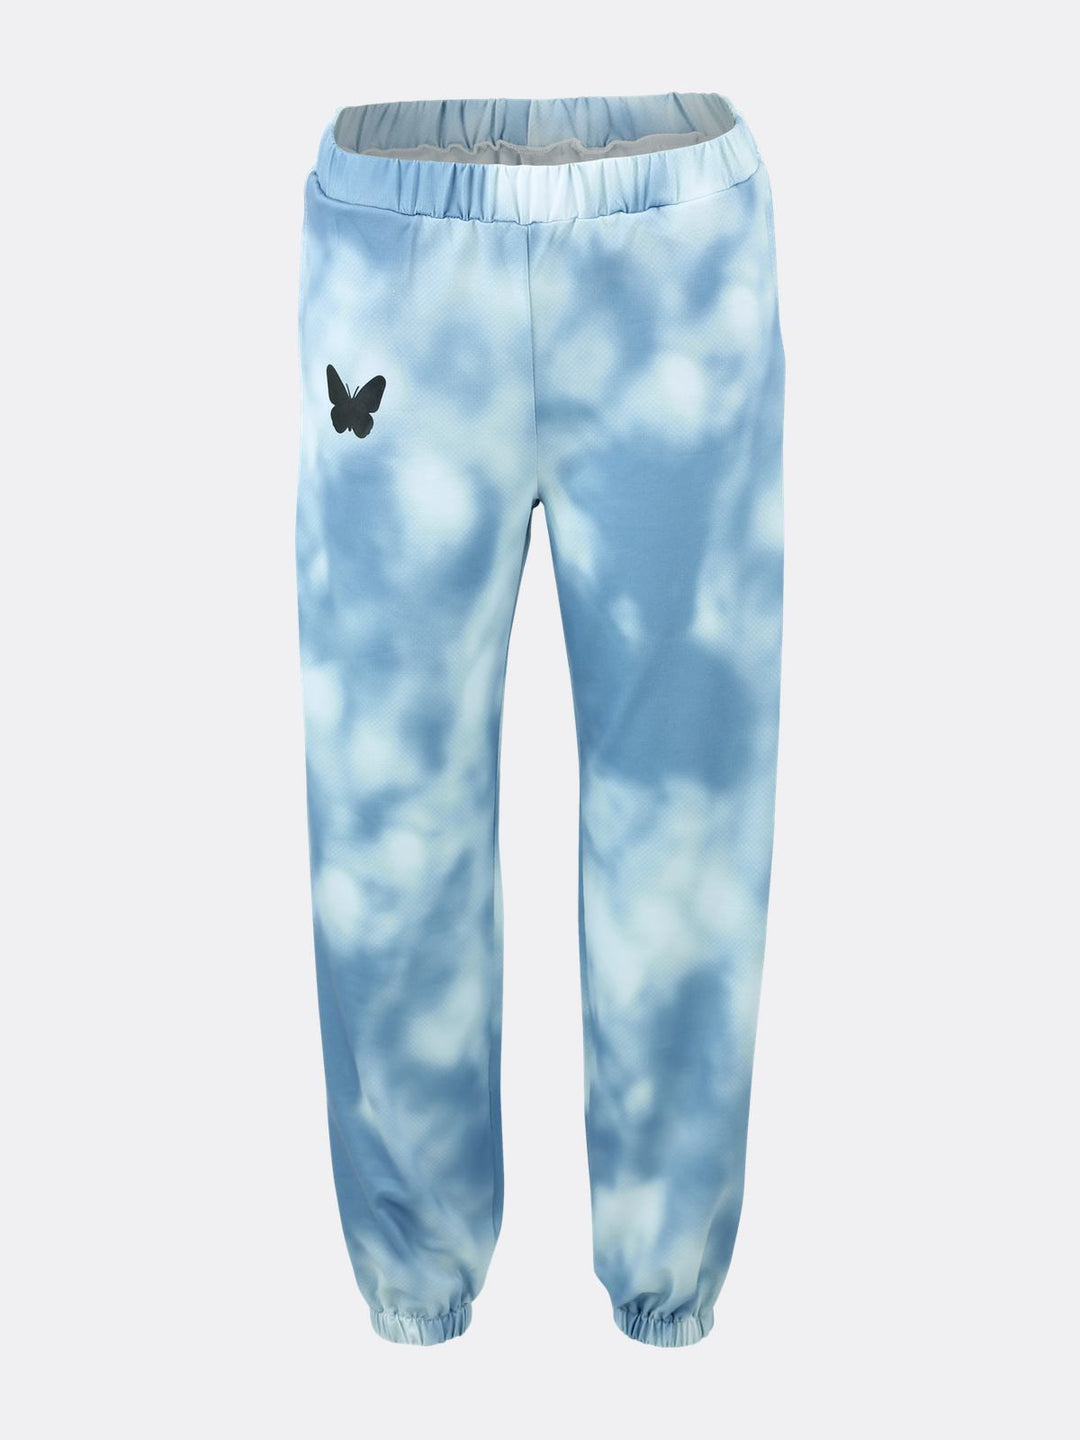 Tie-Dye High Waist Jogging Trousers Butterfly Printed Blue Ghost | Jolovies